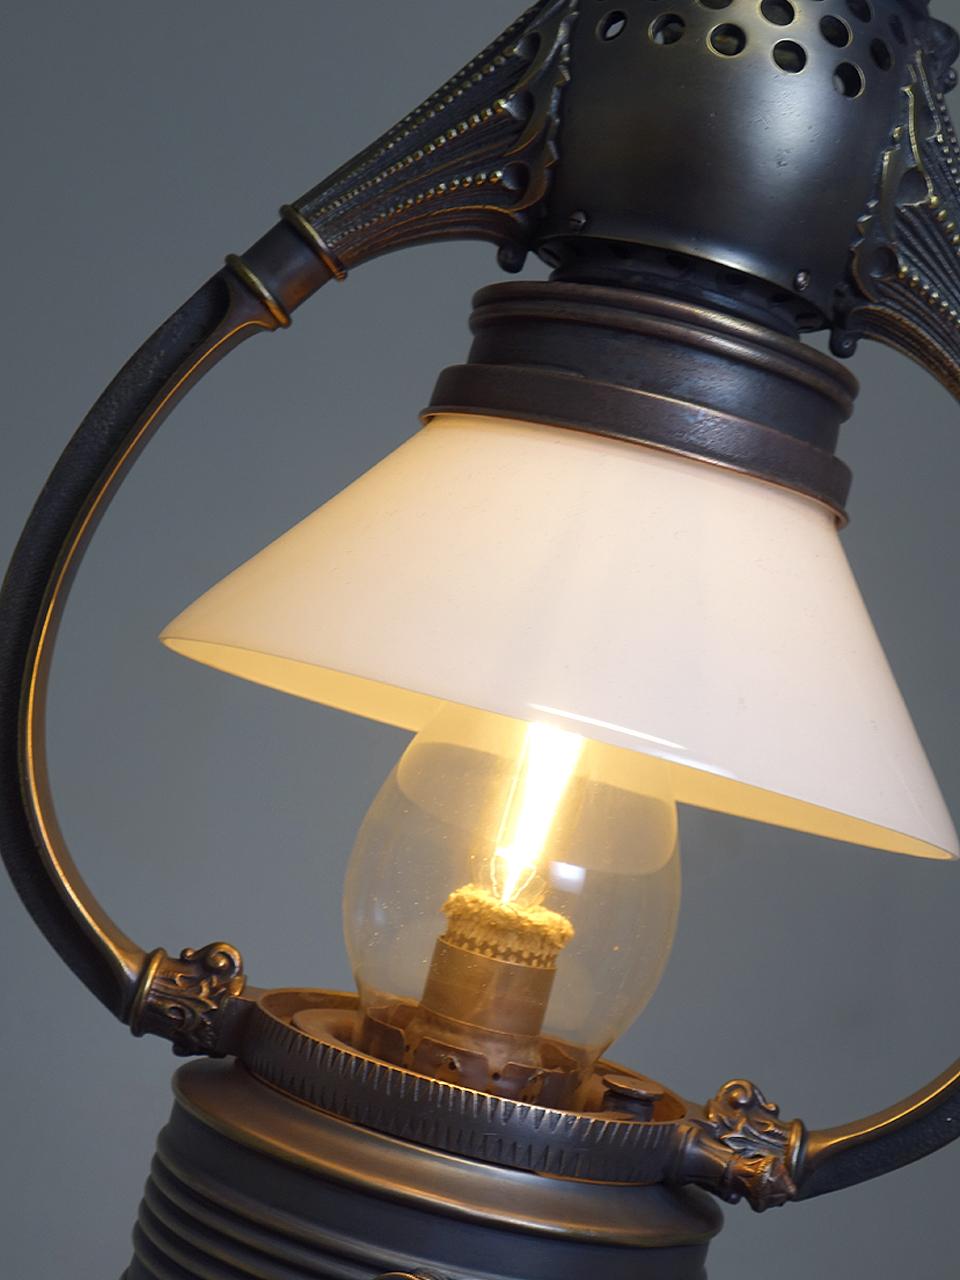 It's rare when you have the chance to purchase objects from an individuals lifelong collection. The depth of knowledge and network of this important collector/expert can't be duplicated. We had the opportunity to see these lamps first-hand and